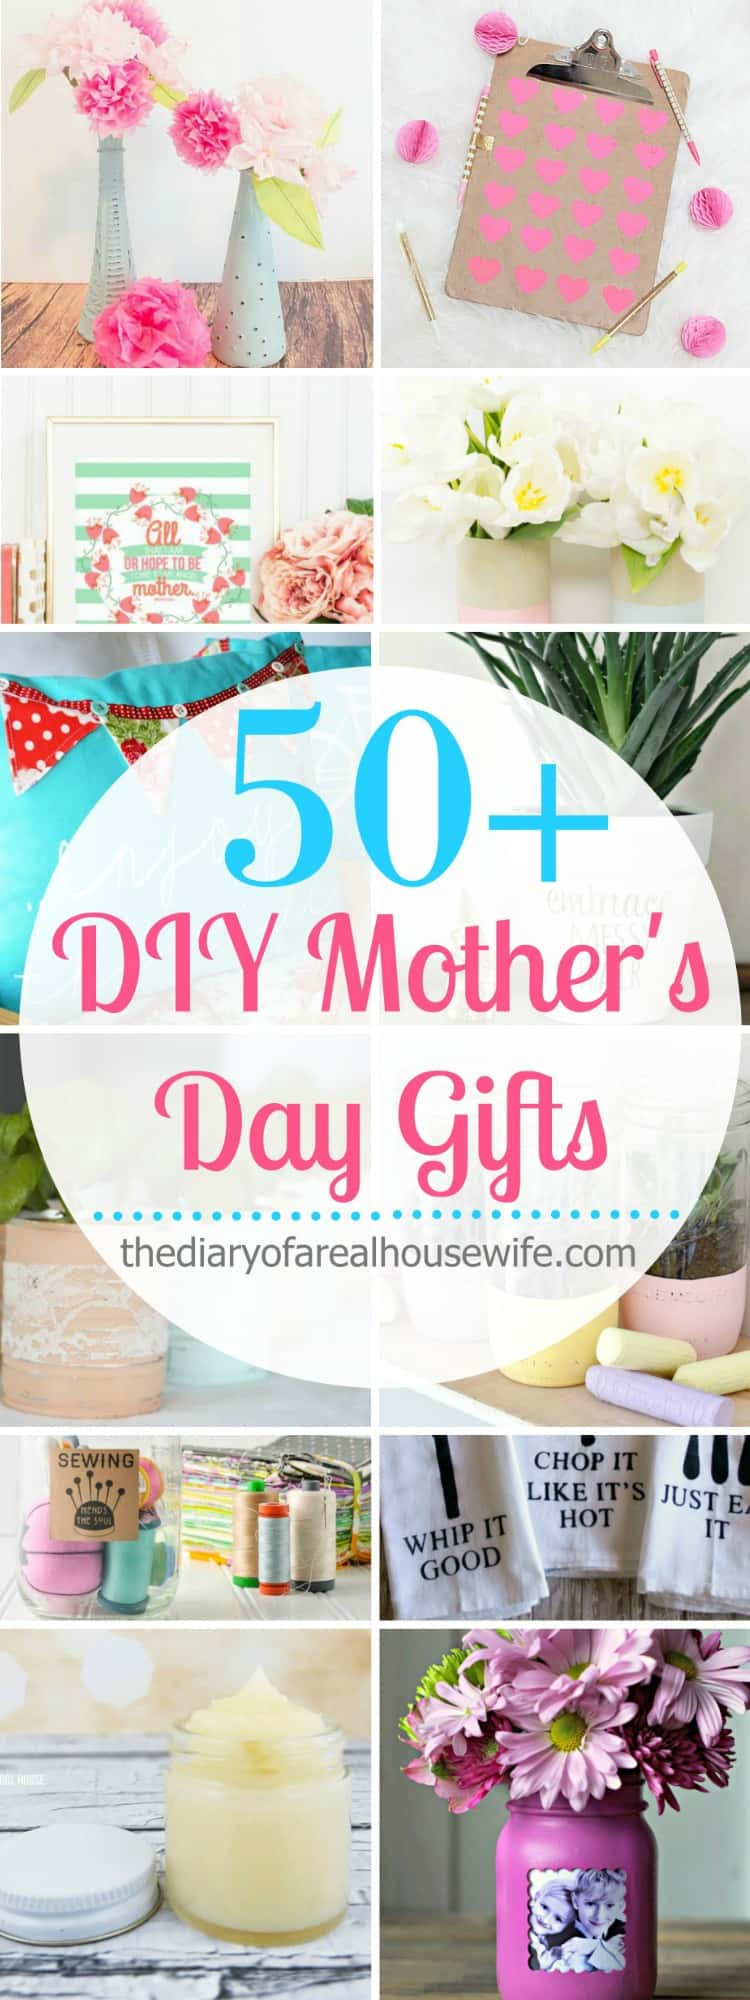 Best Mother'S Day Gift Ideas
 DIY Mother s Day Gift Ideas The Diary of a Real Housewife